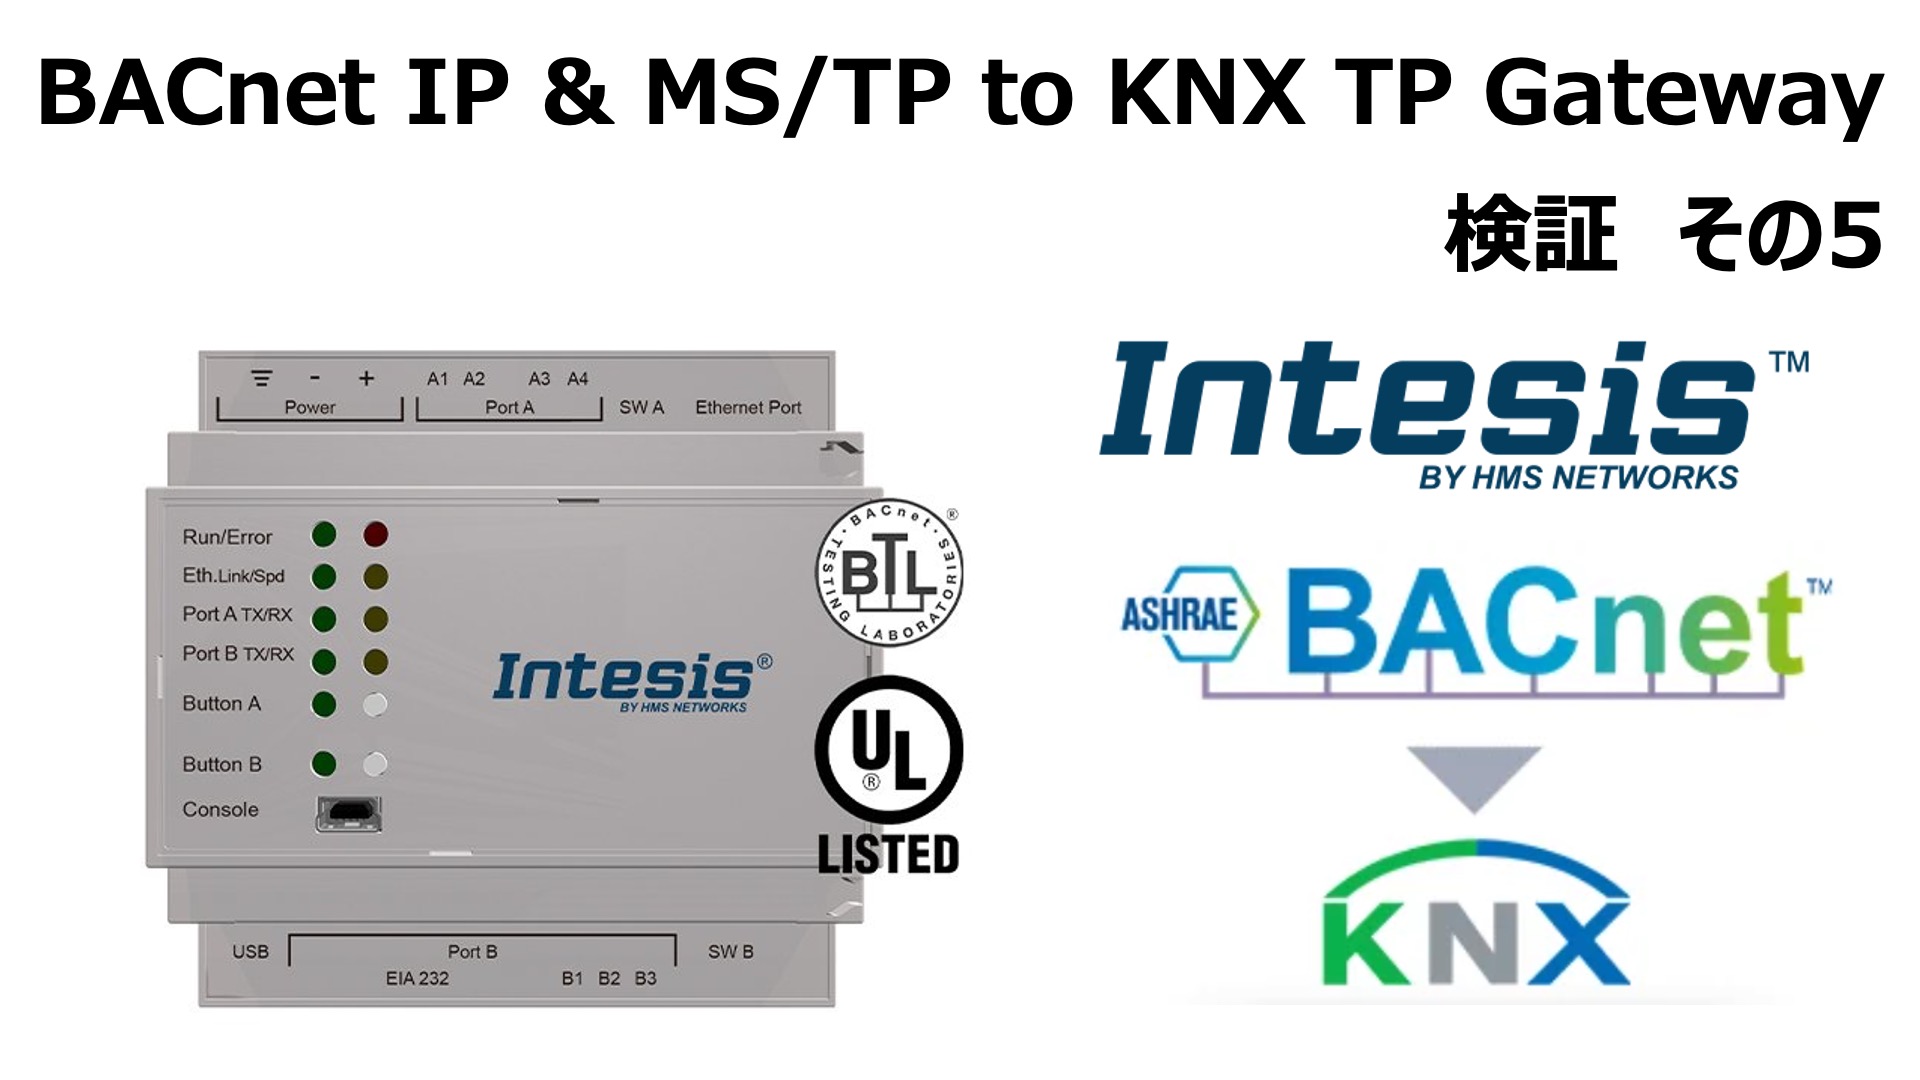 INTESIS BACnet IP & MS/TP Client to KNX TP Gateway 検証その5